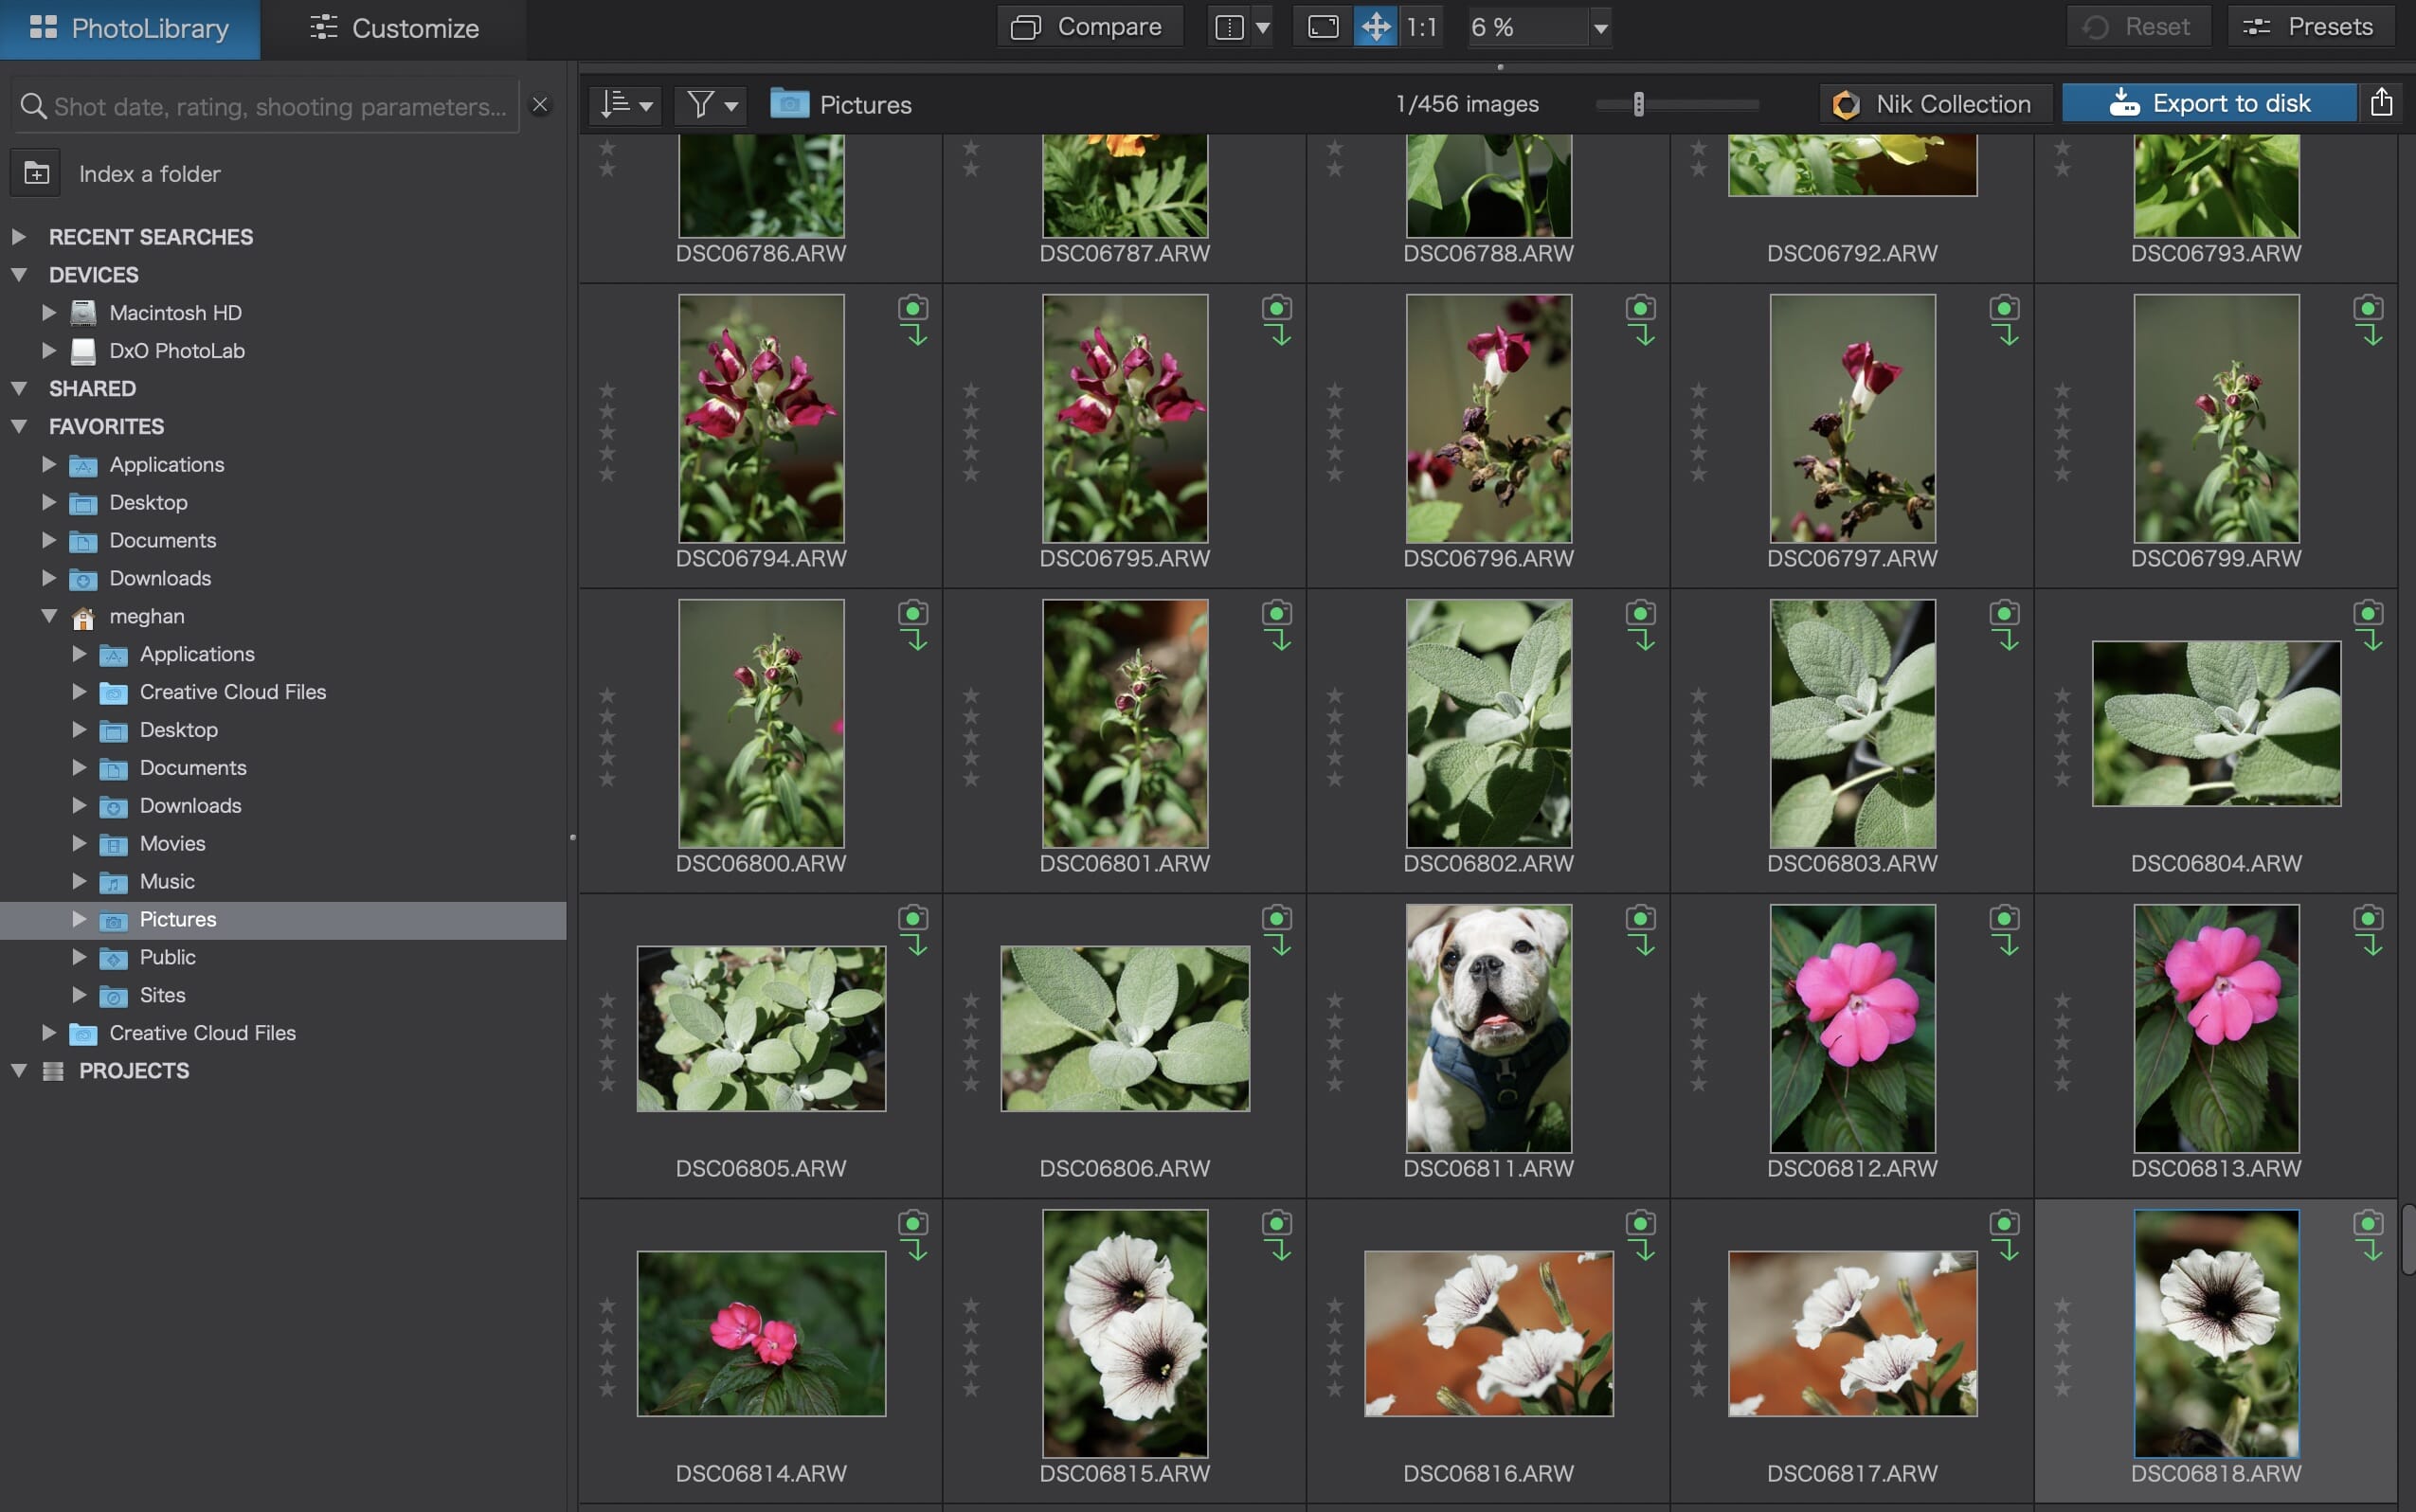 DxO PhotoLab 7.0.2.83 for apple download free